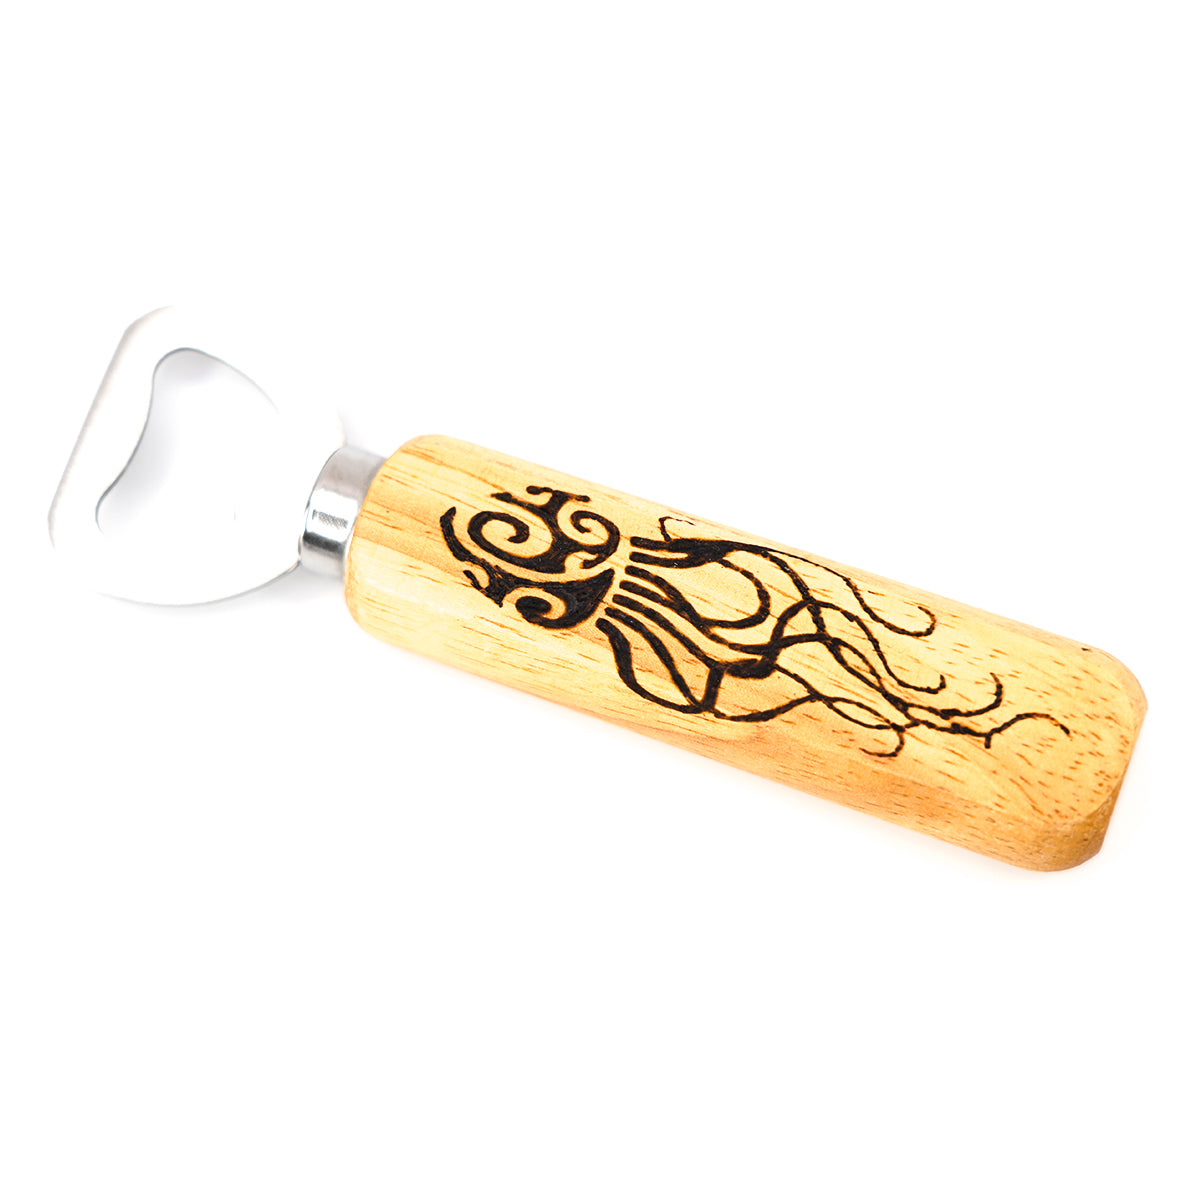 Wood and Stainless Steel Bottle Opener - Jellyfish